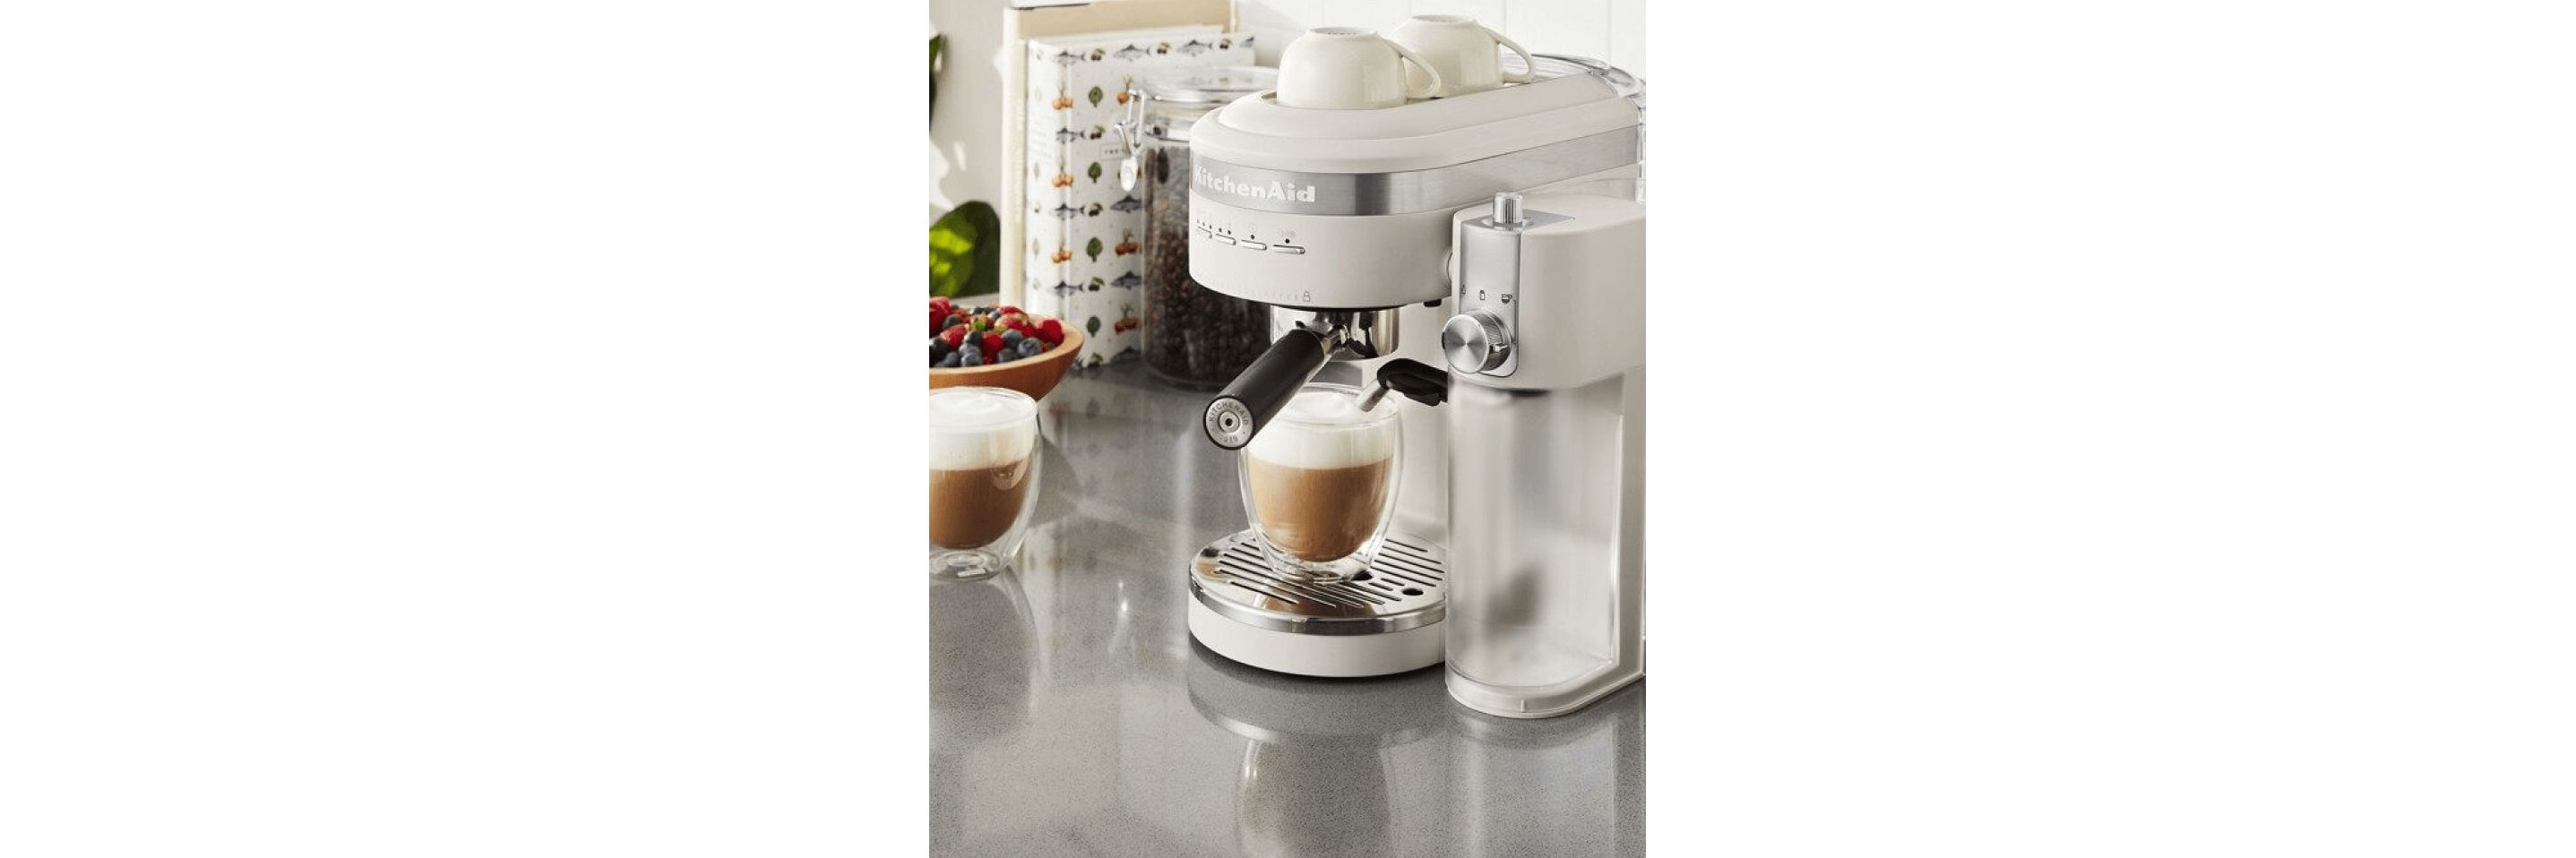 Kitchen Appliances to Bring Culinary Inspiration to Life | KitchenAid